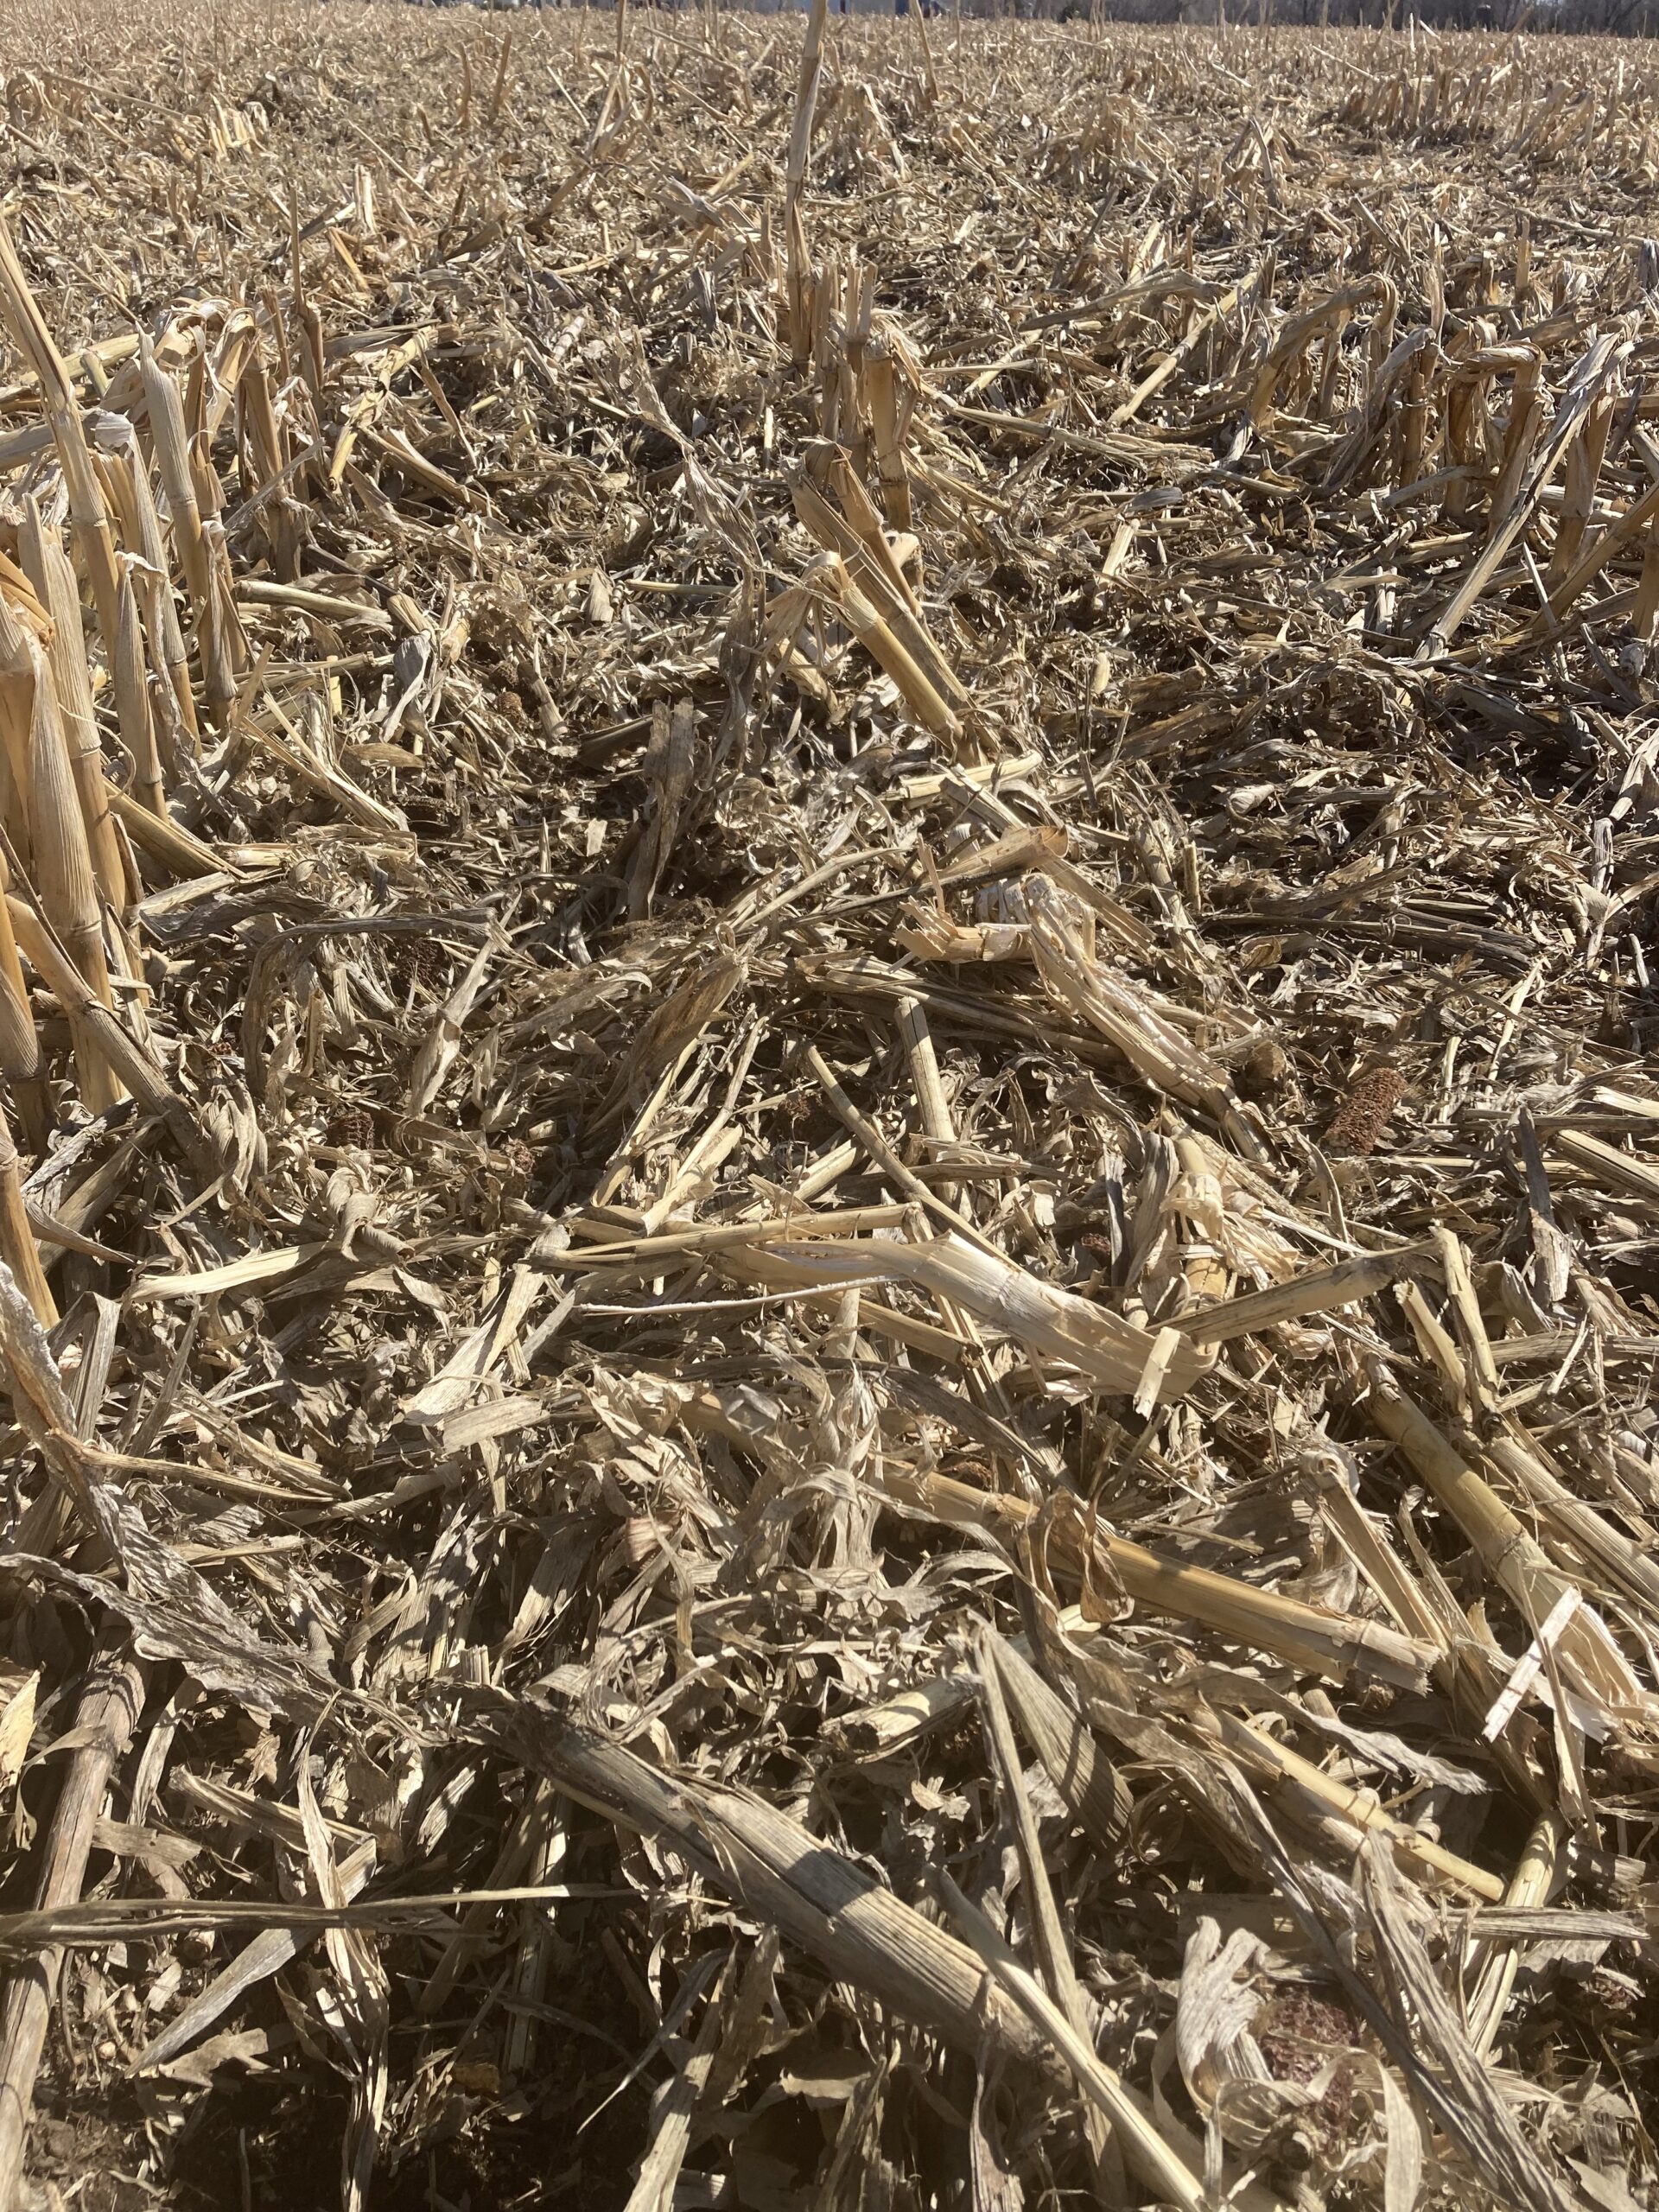 A photo showing very heavy corn residue on a field.